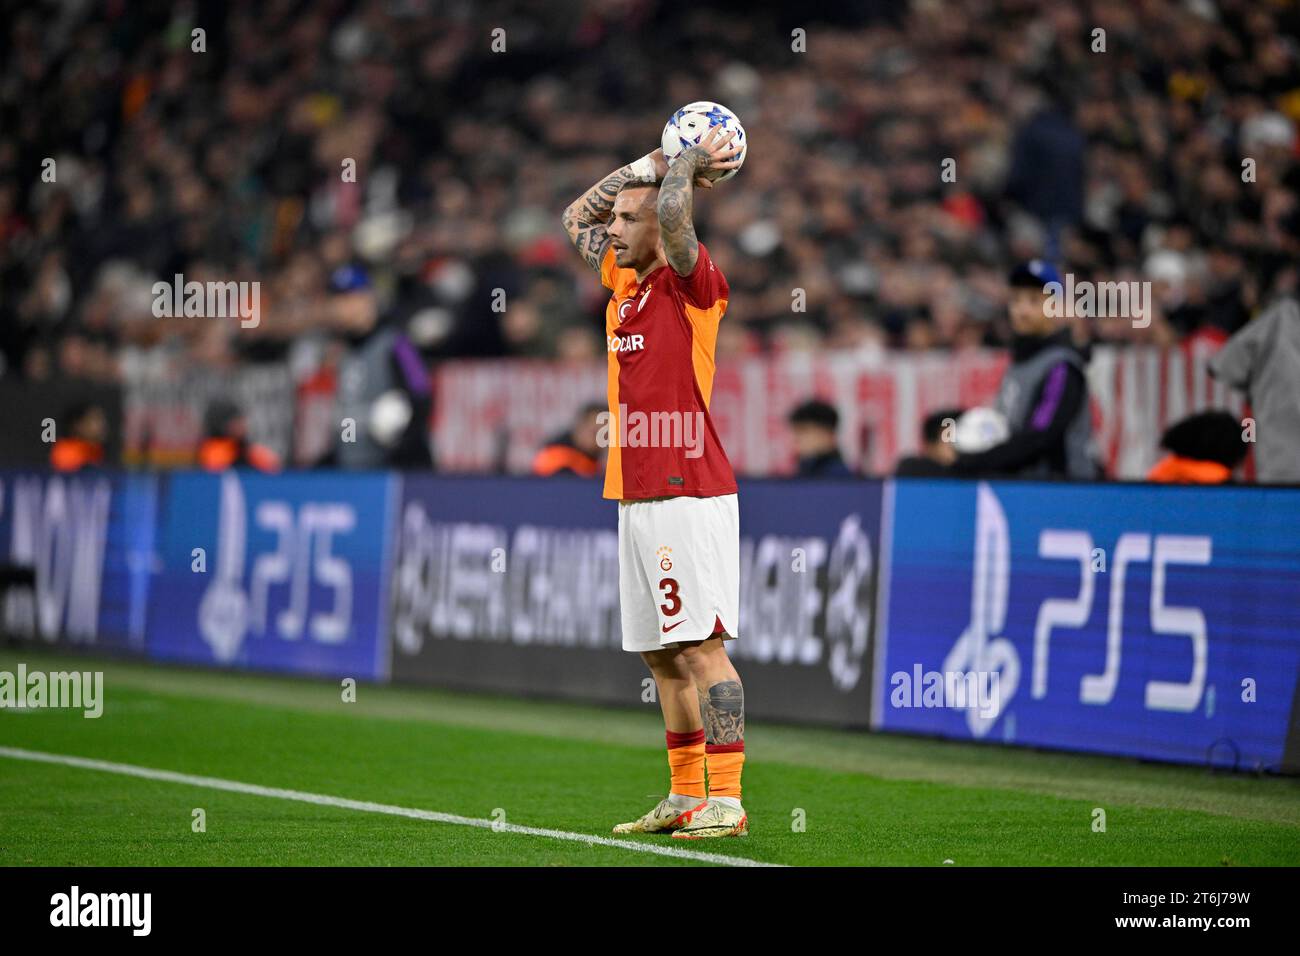 Throw-in action Angelino Galatasaray Istanbul (03), Champions League, Allianz Arena, Munich, Bavaria, Germany Stock Photo